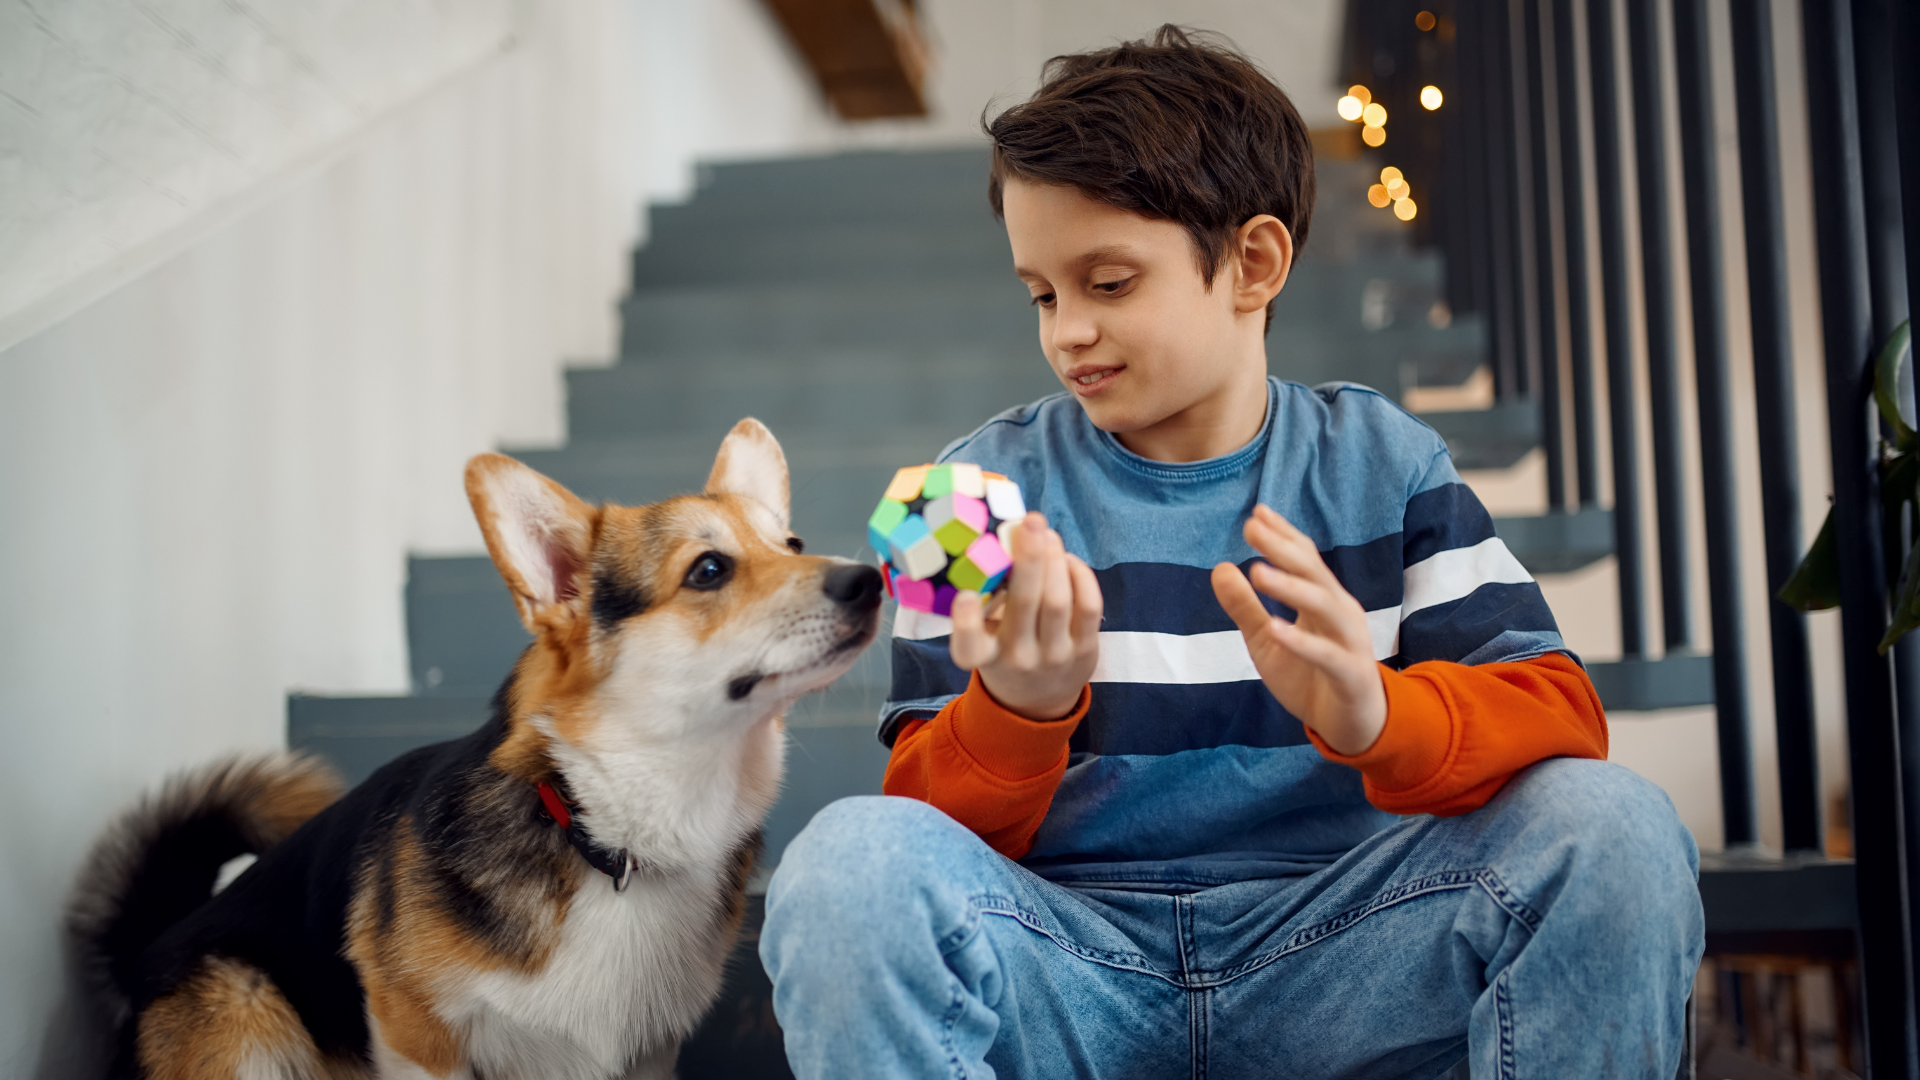 Making DIY Dog Toys with Your Kids